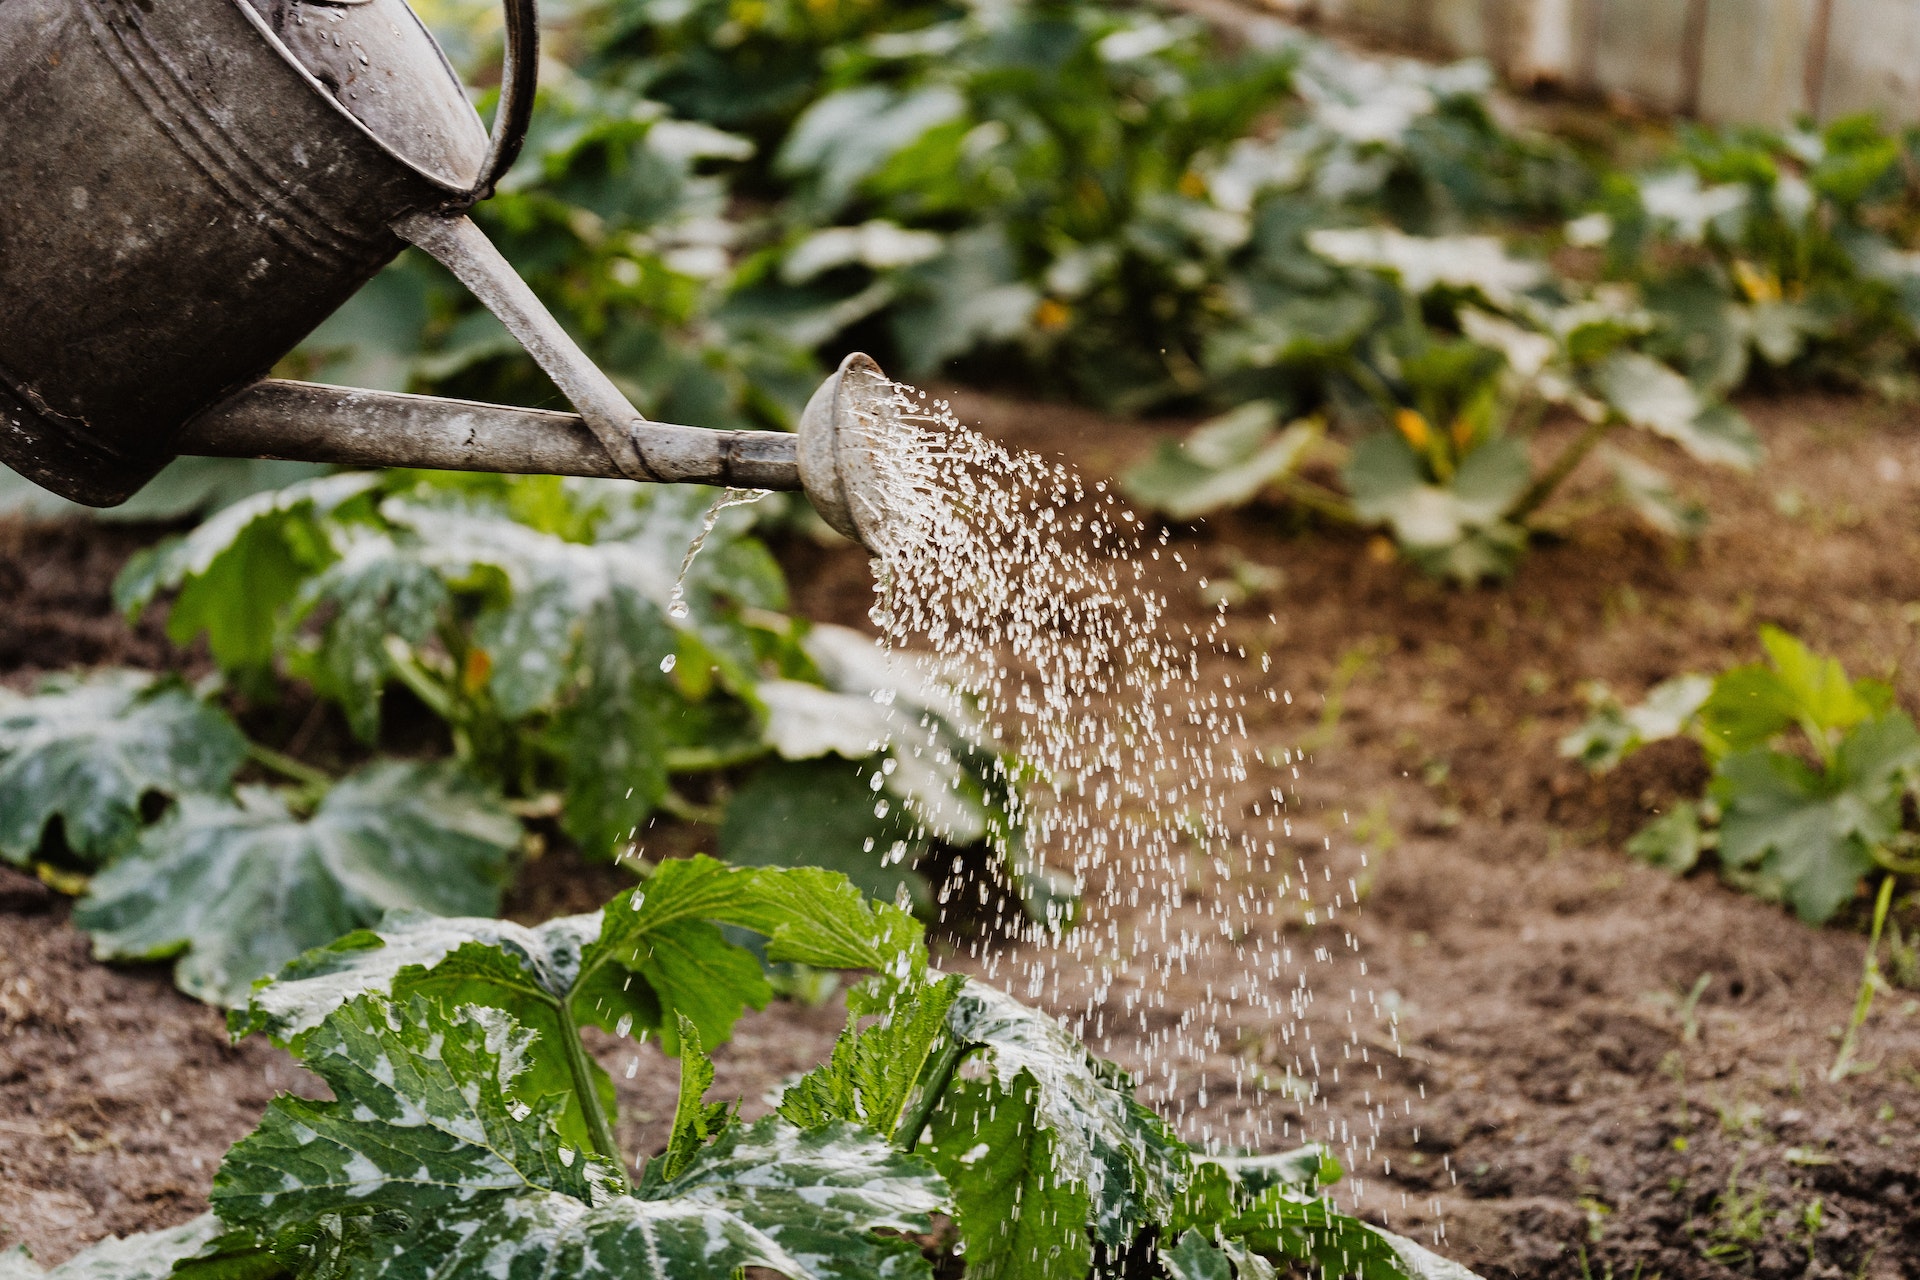 Close-up of water streaming from a vintage watering can onto a lush vegetable garden with healthy green plants.